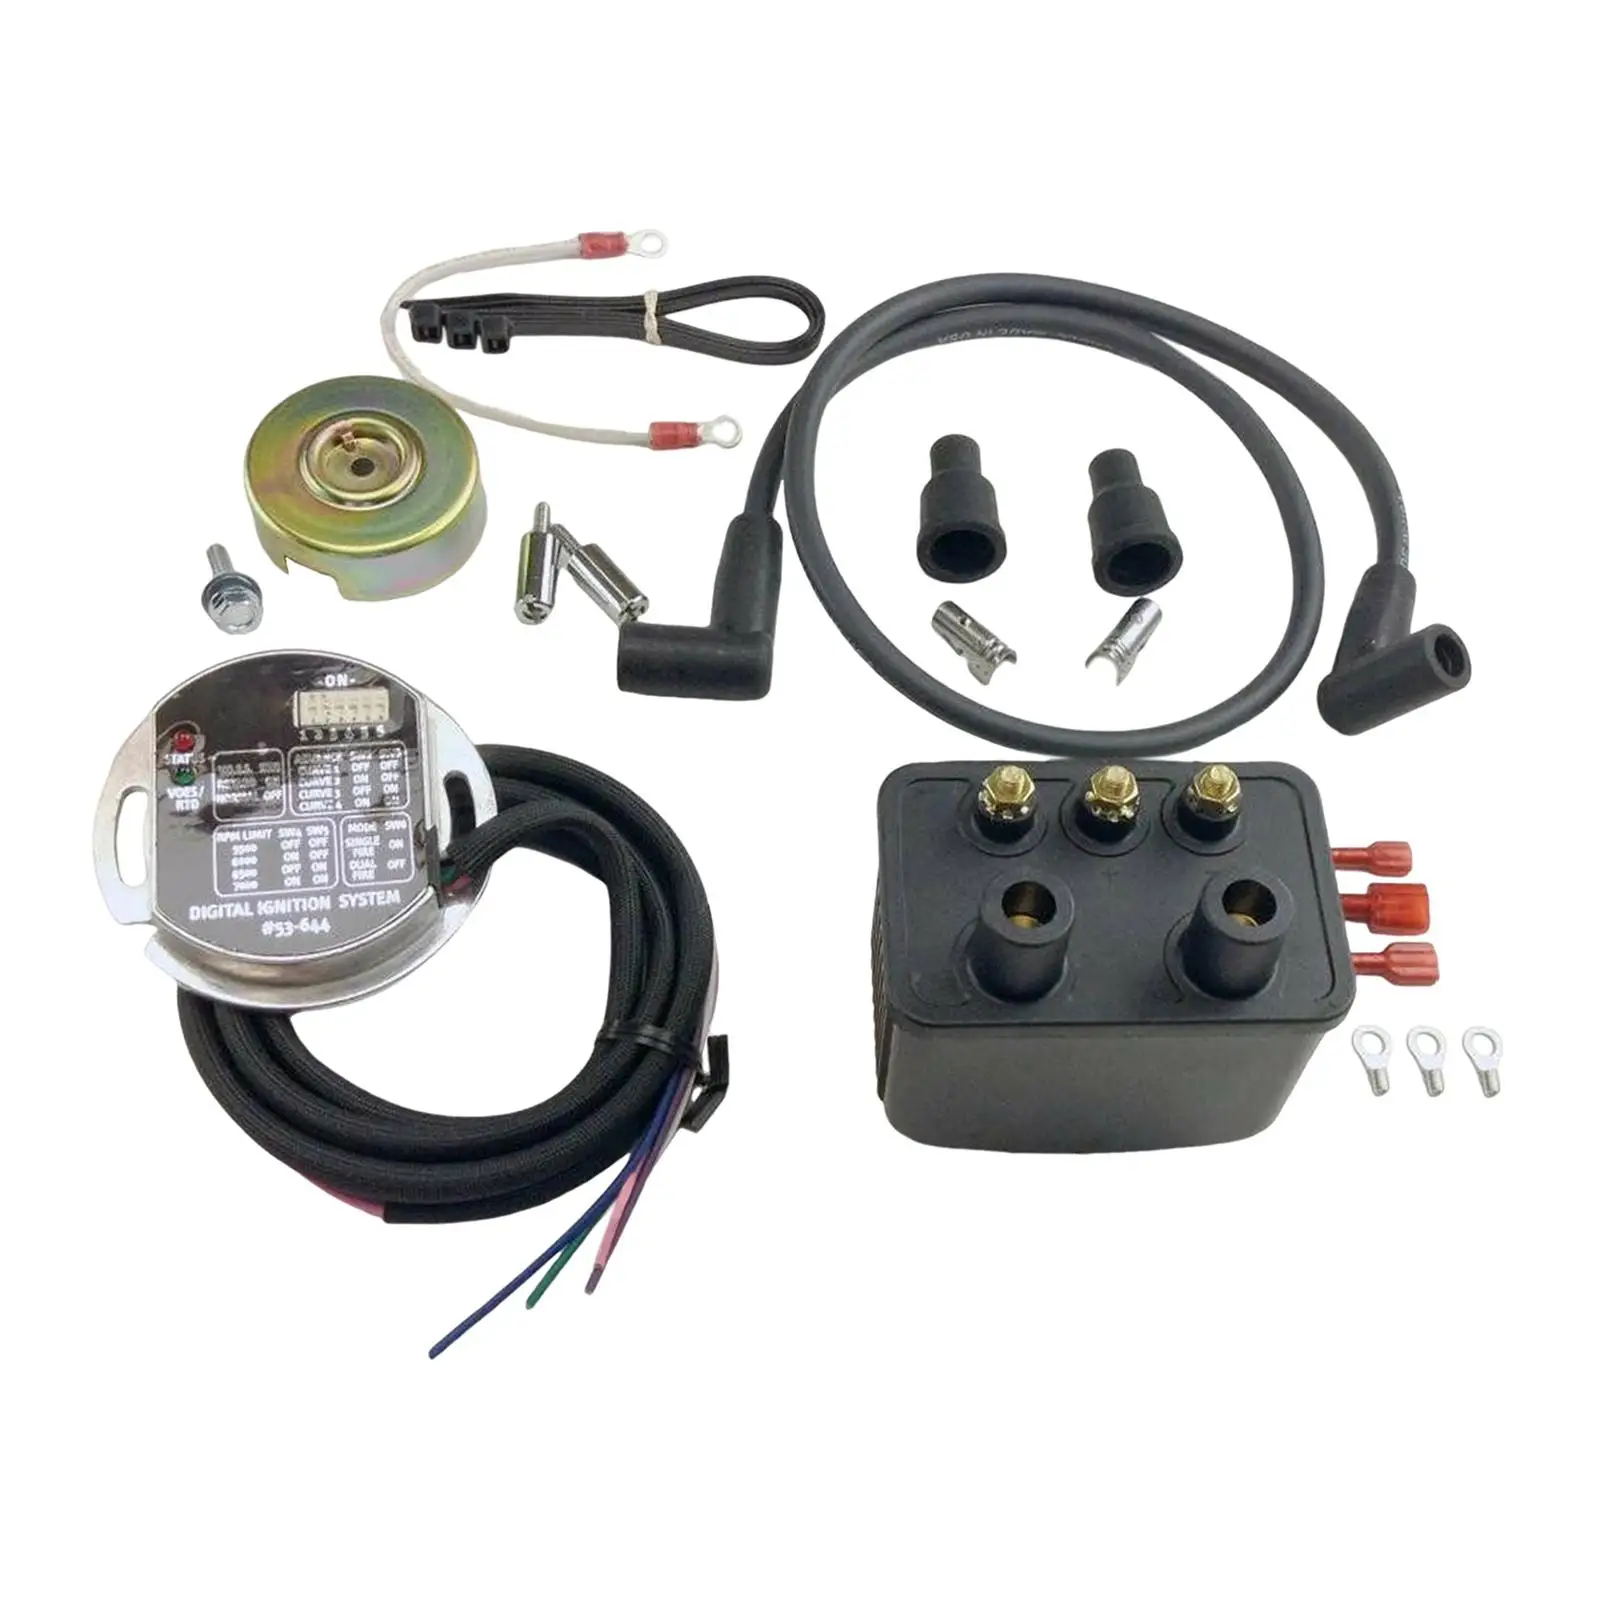 Electronic Ignition Kit Replacement Accessories for Harley Shovelhead Easy to Install Premium Quality Stable Performance